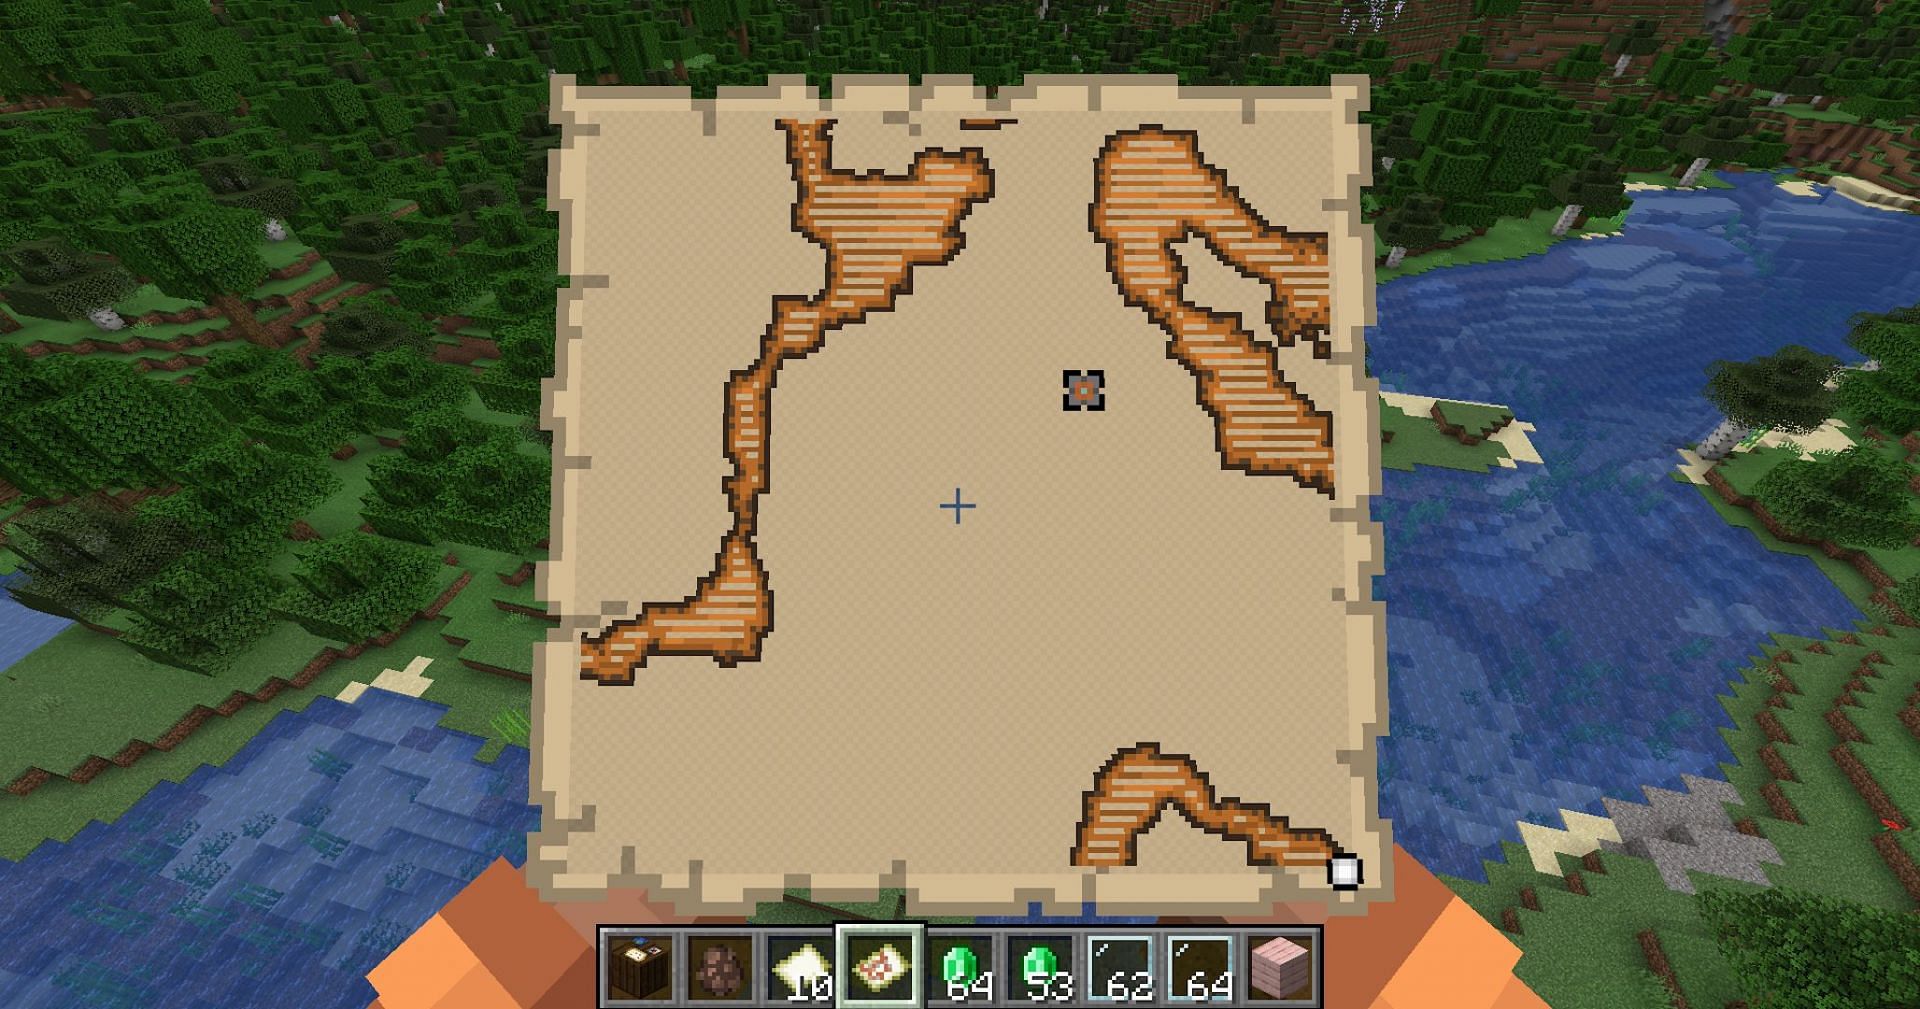 Find a trial chamber using trial chamber explorer map (Image via Mojang)